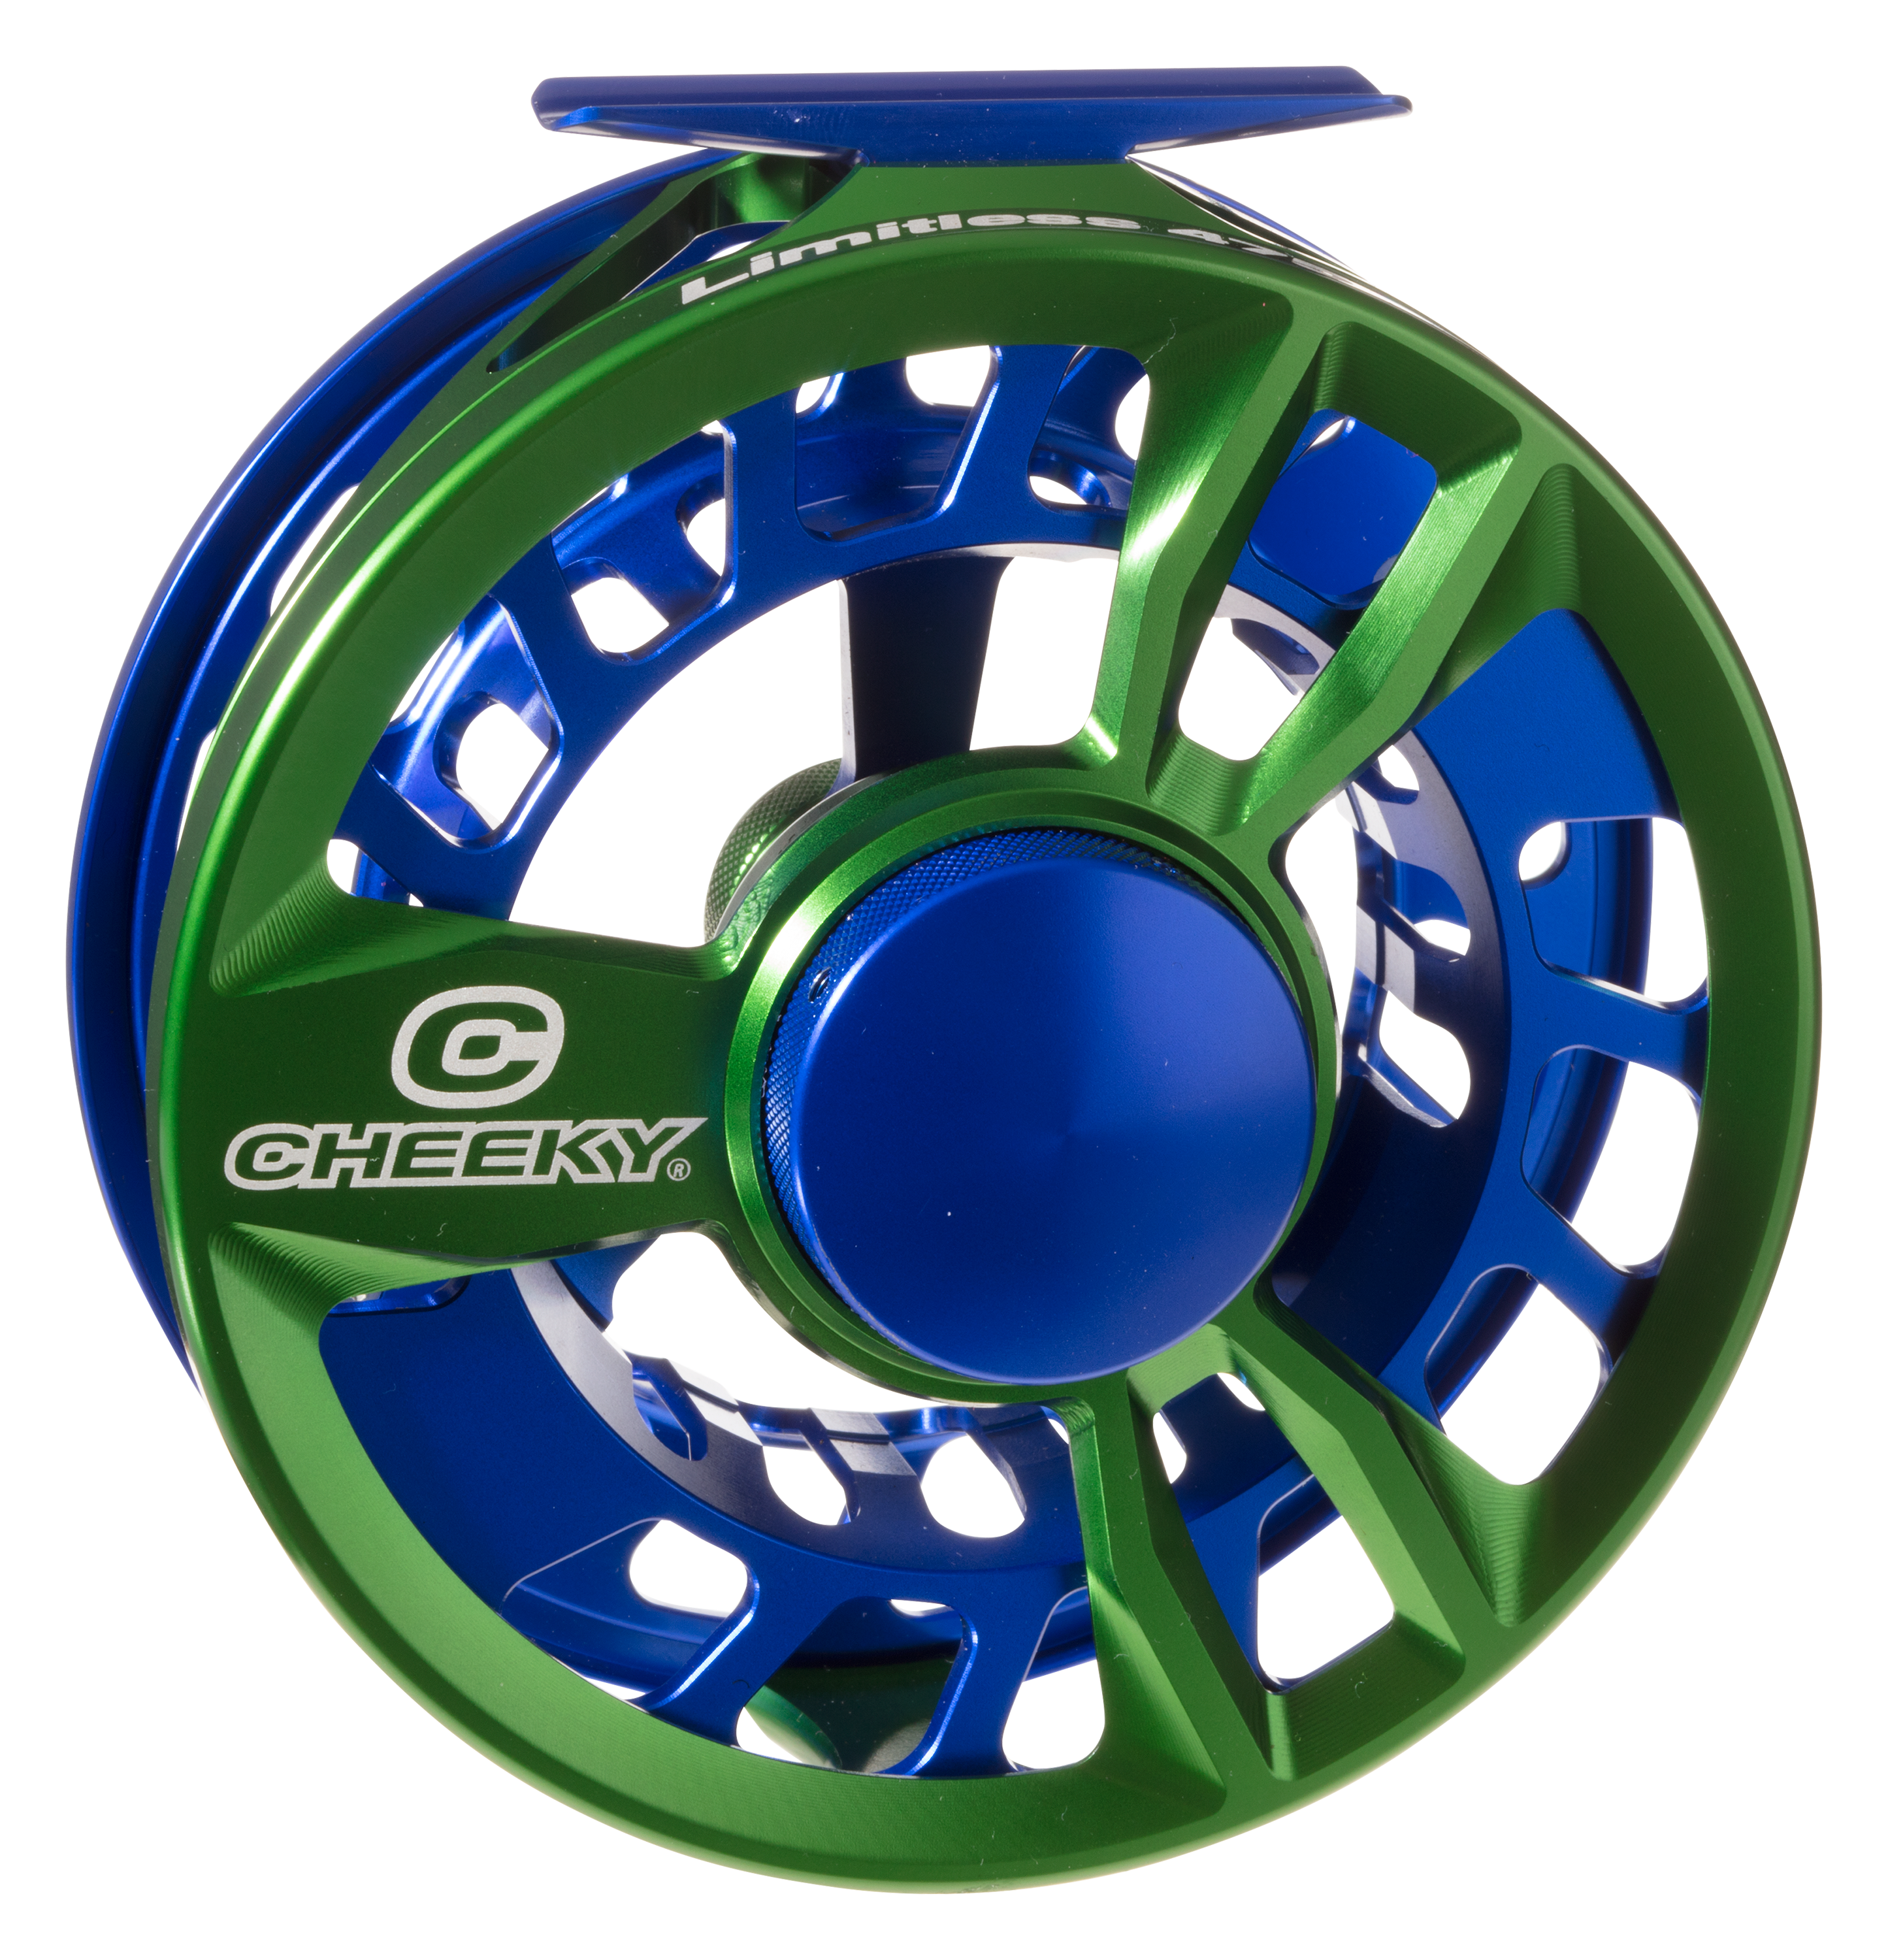 Cheeky Limitless Fly Reel - Green Blue - Model 2004